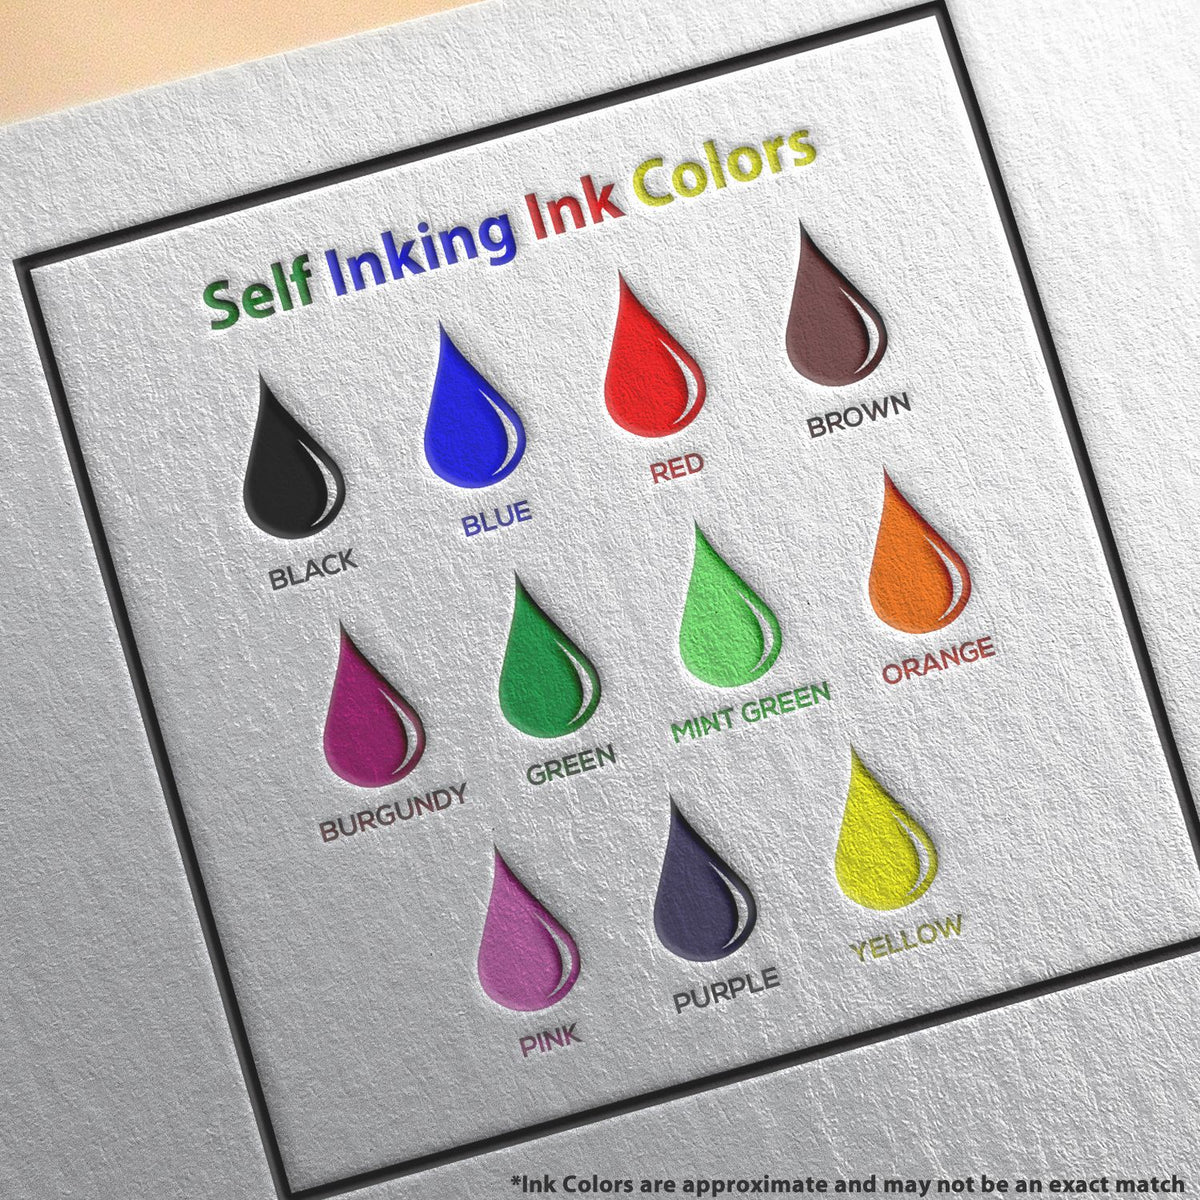 A picture showing the different ink colors or hues available for the Self-Inking Alabama Landscape Architect Stamp product.